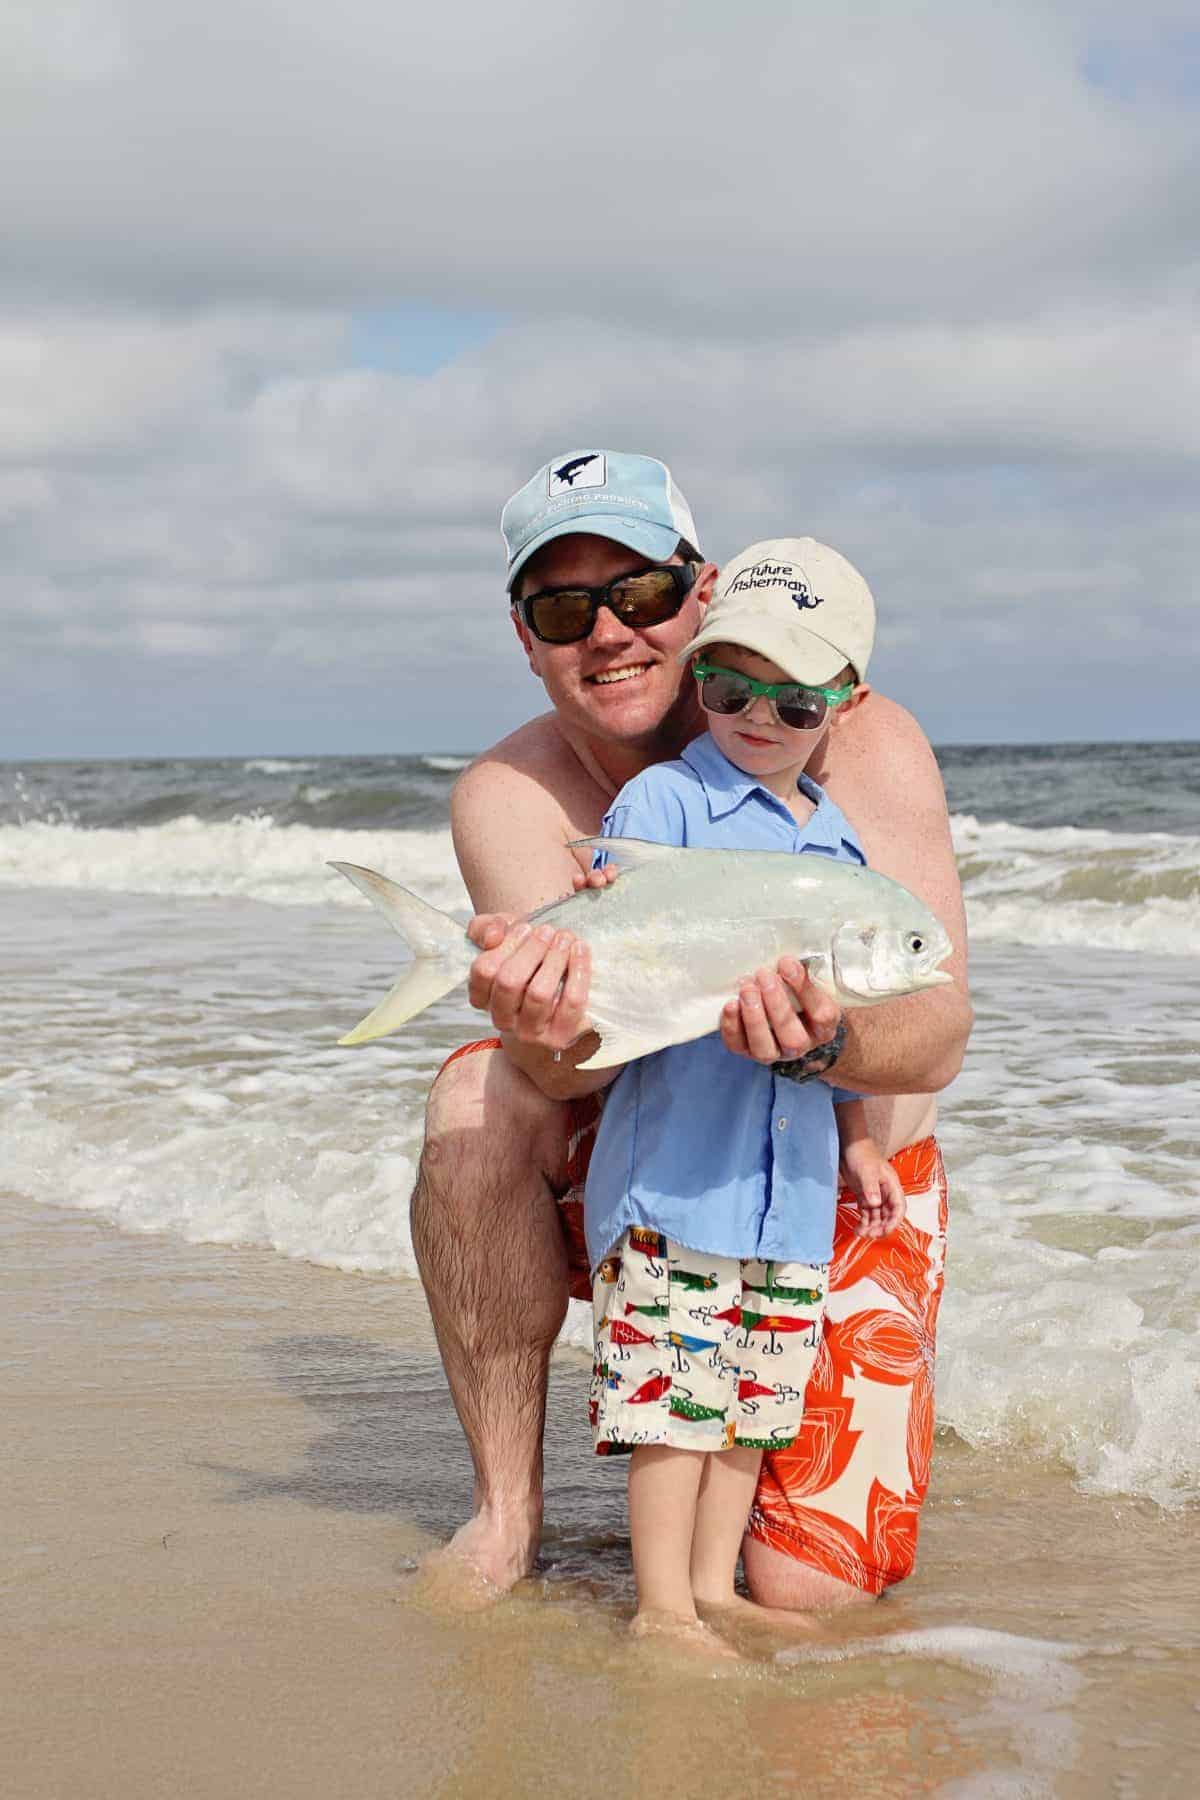 Tips for kids and families to start fishing in the Lowcountry